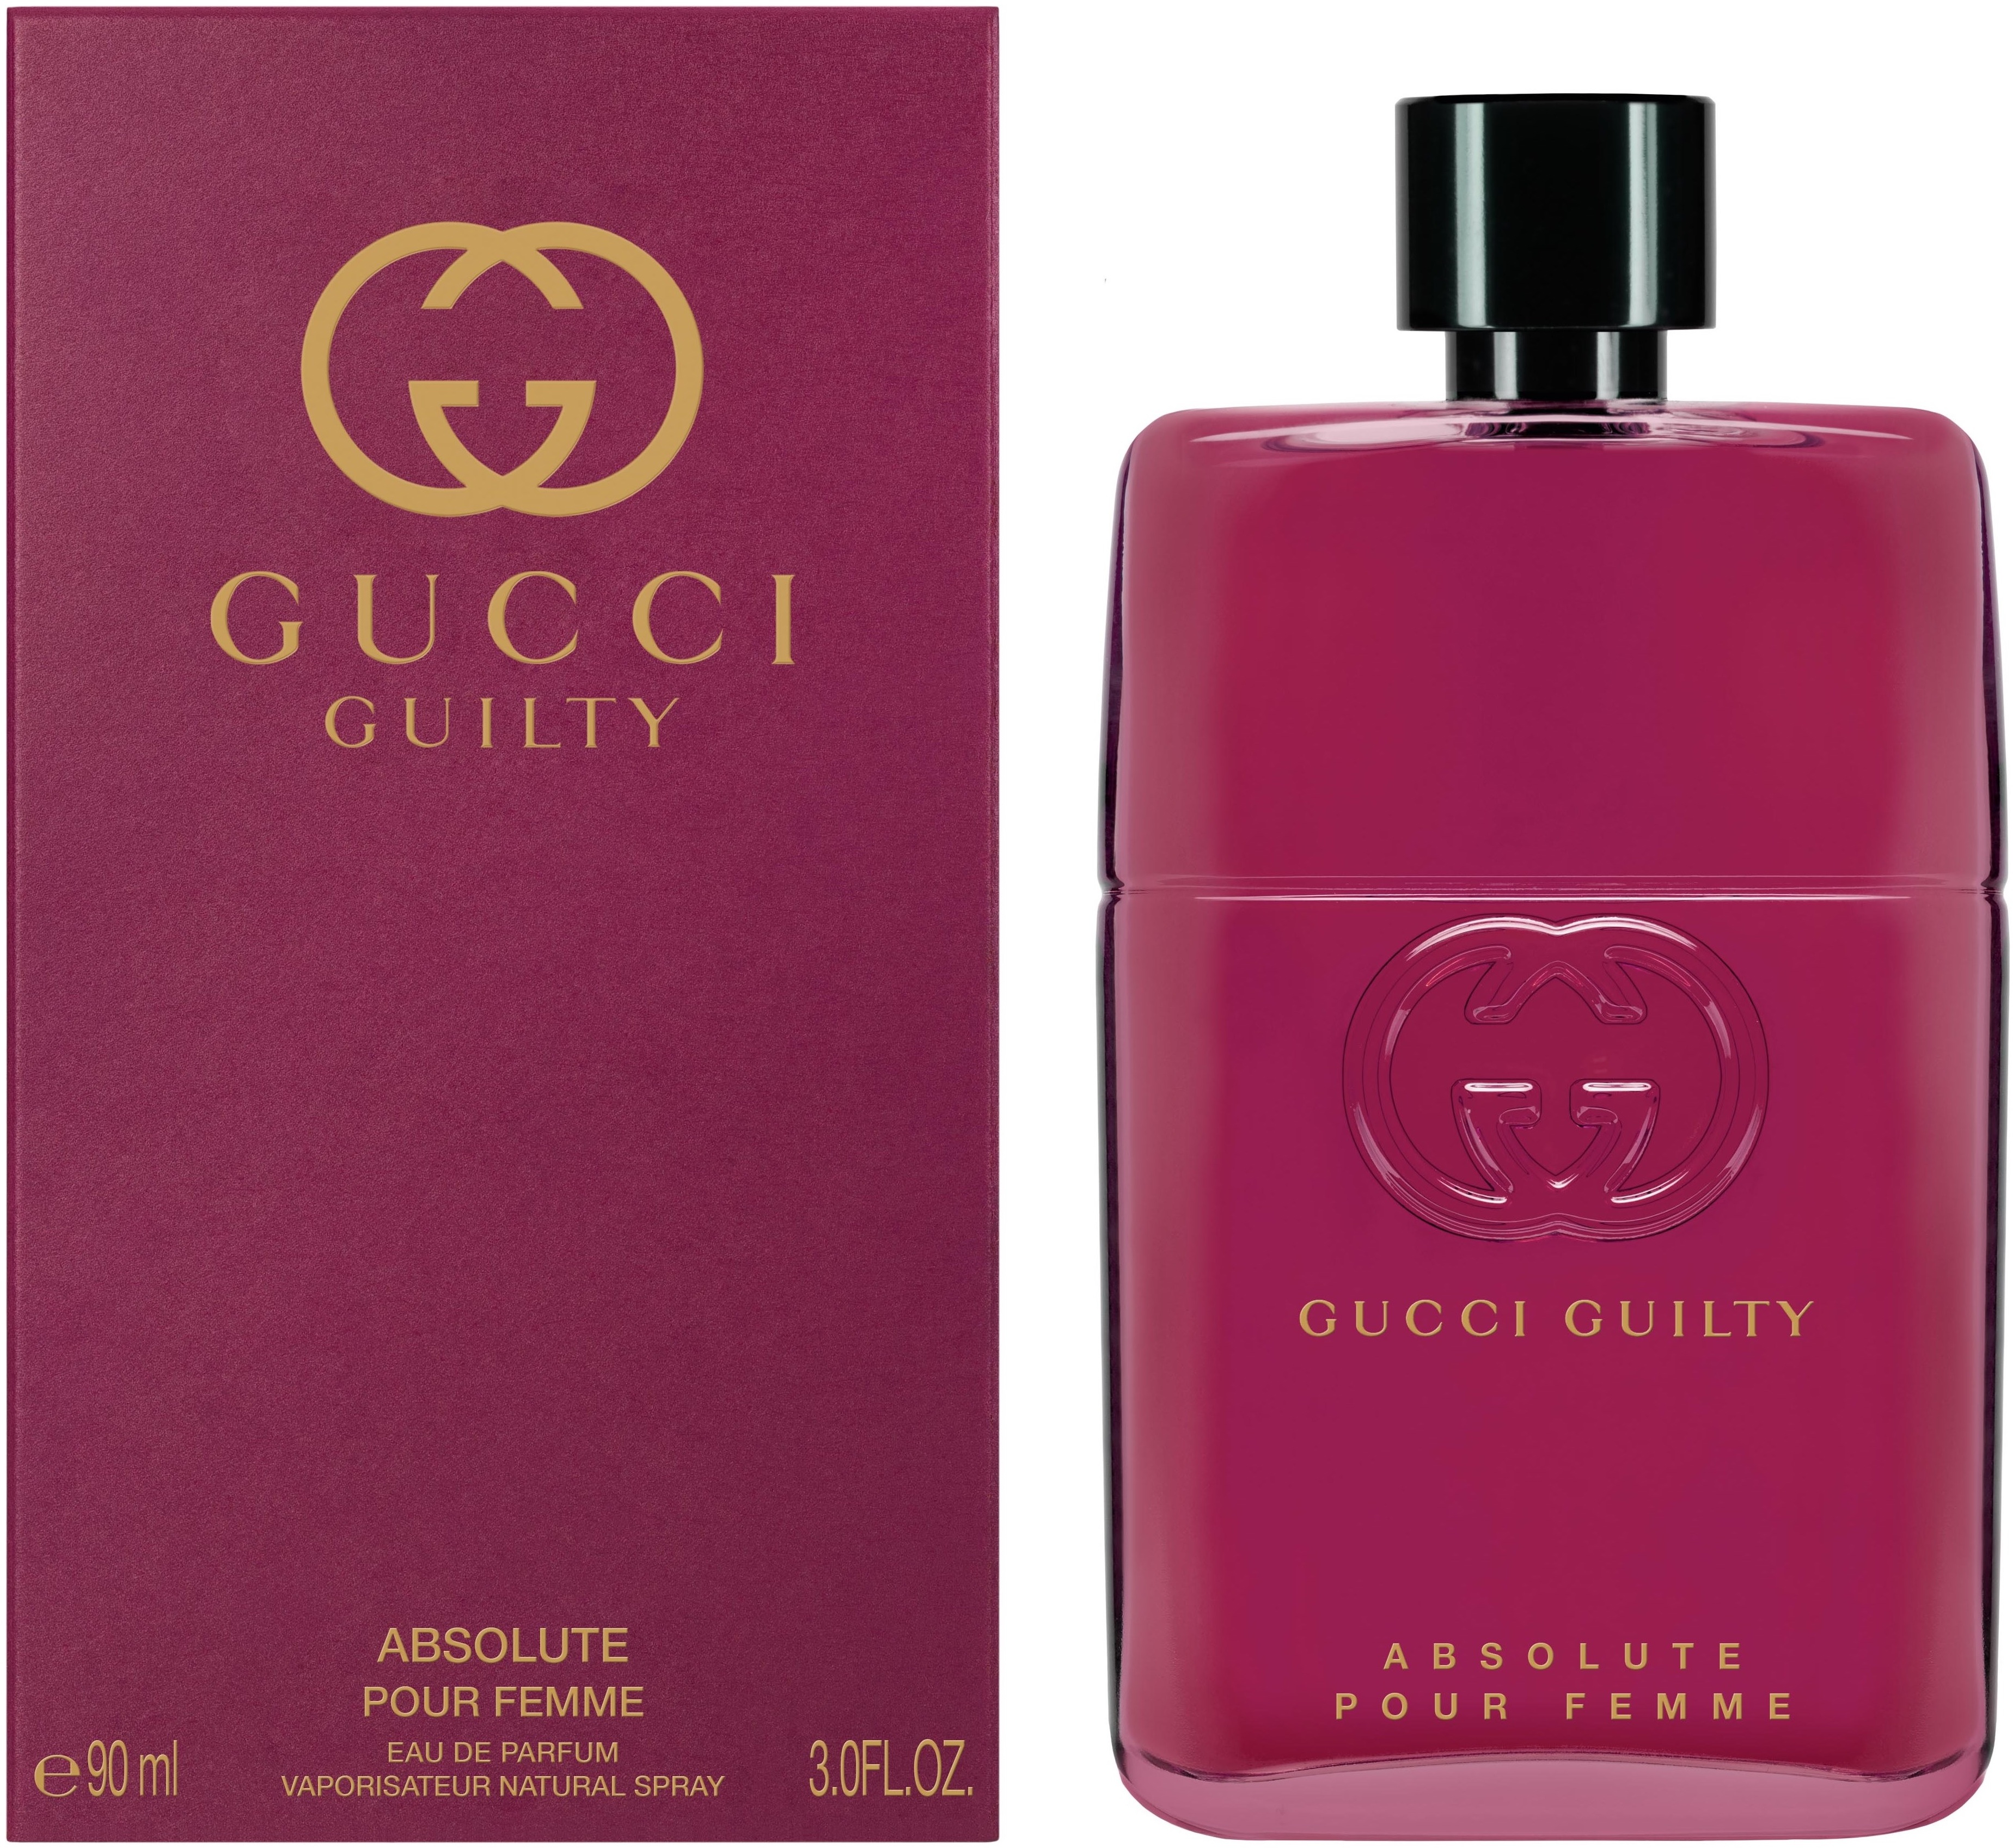 gucci guilty absolute pour femme perfume